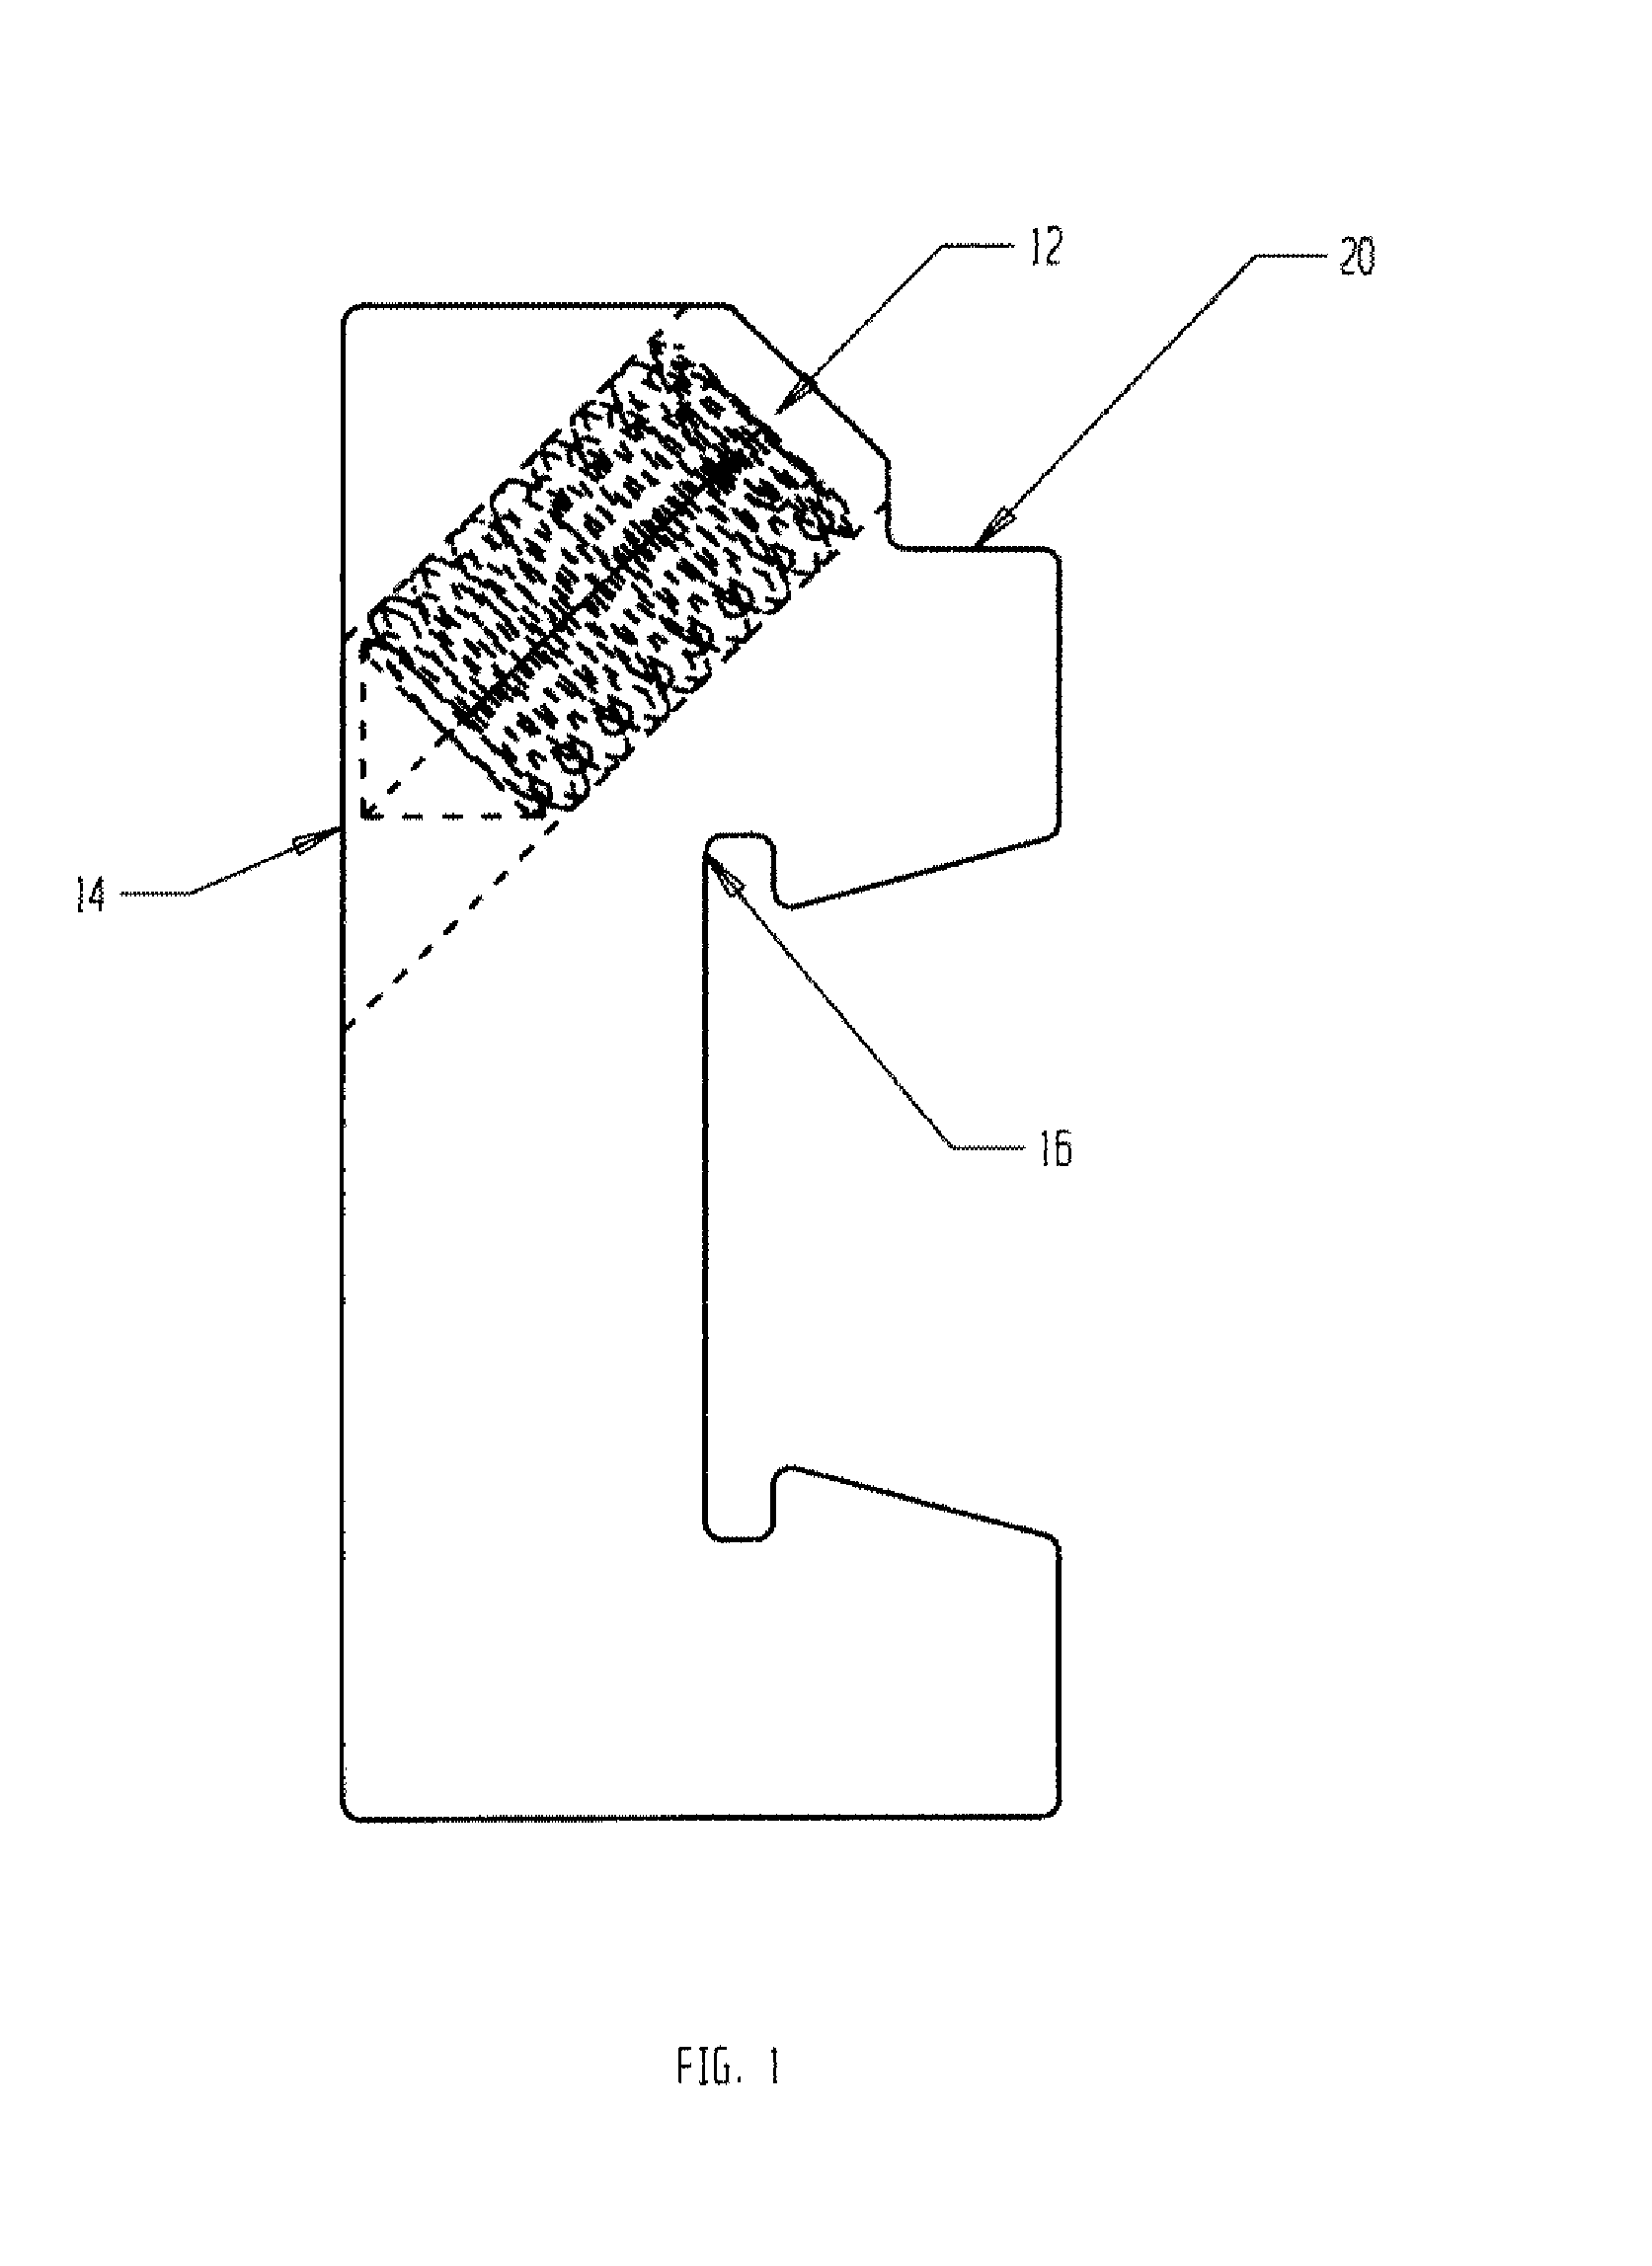 Method of installing an anti-siphon assembly